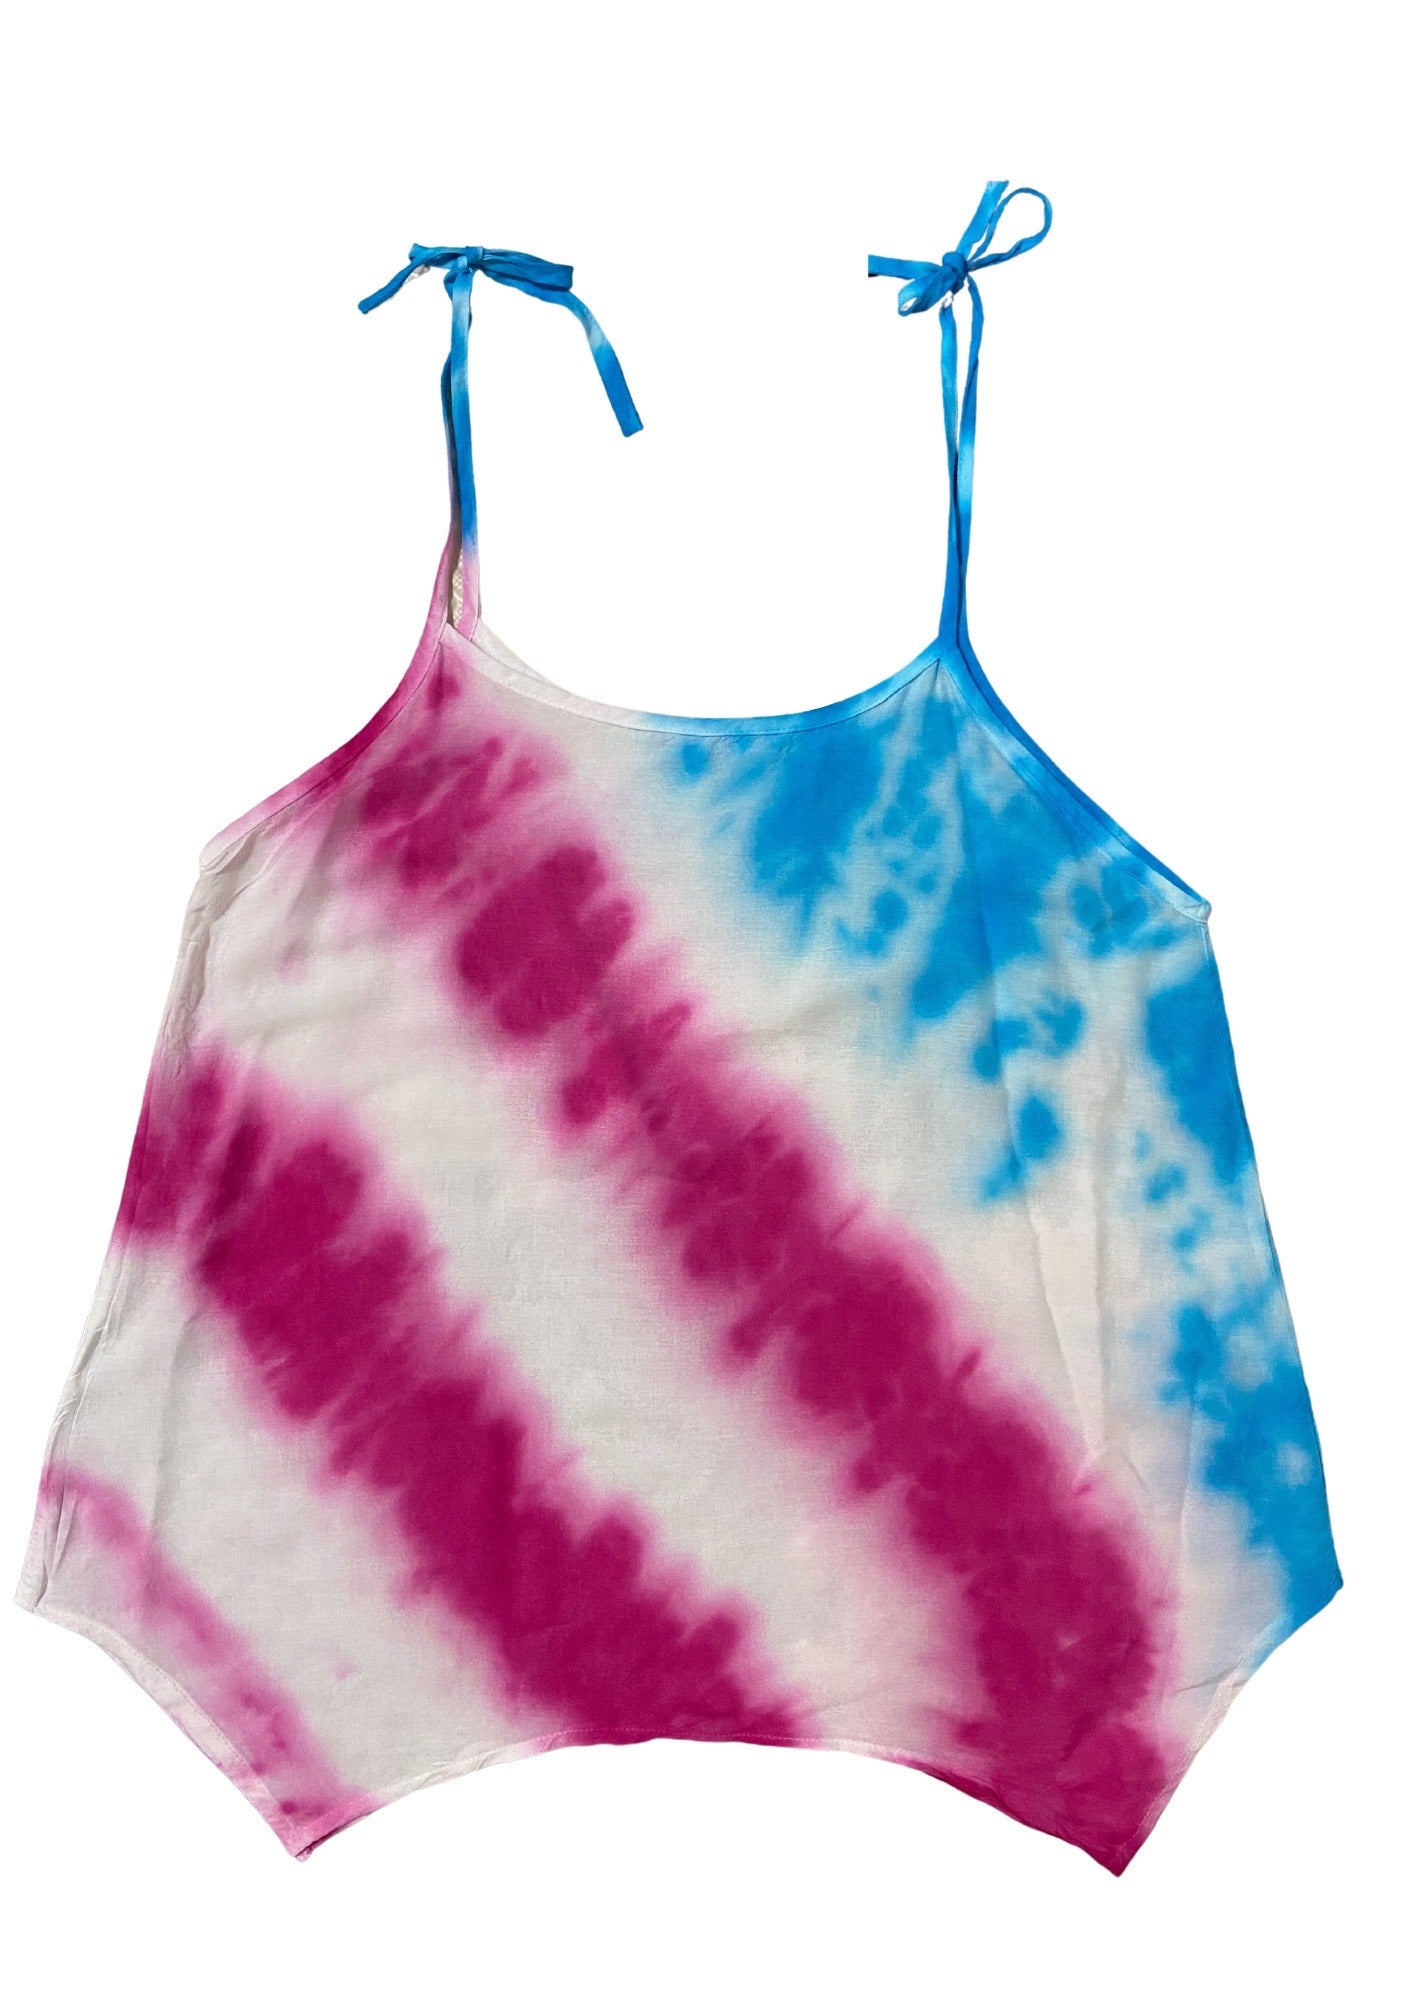 Cami Camisole Teen & Women, One Size Free Size Fit 0 to 8, Handmade Tie Dyed - Candy Sweet